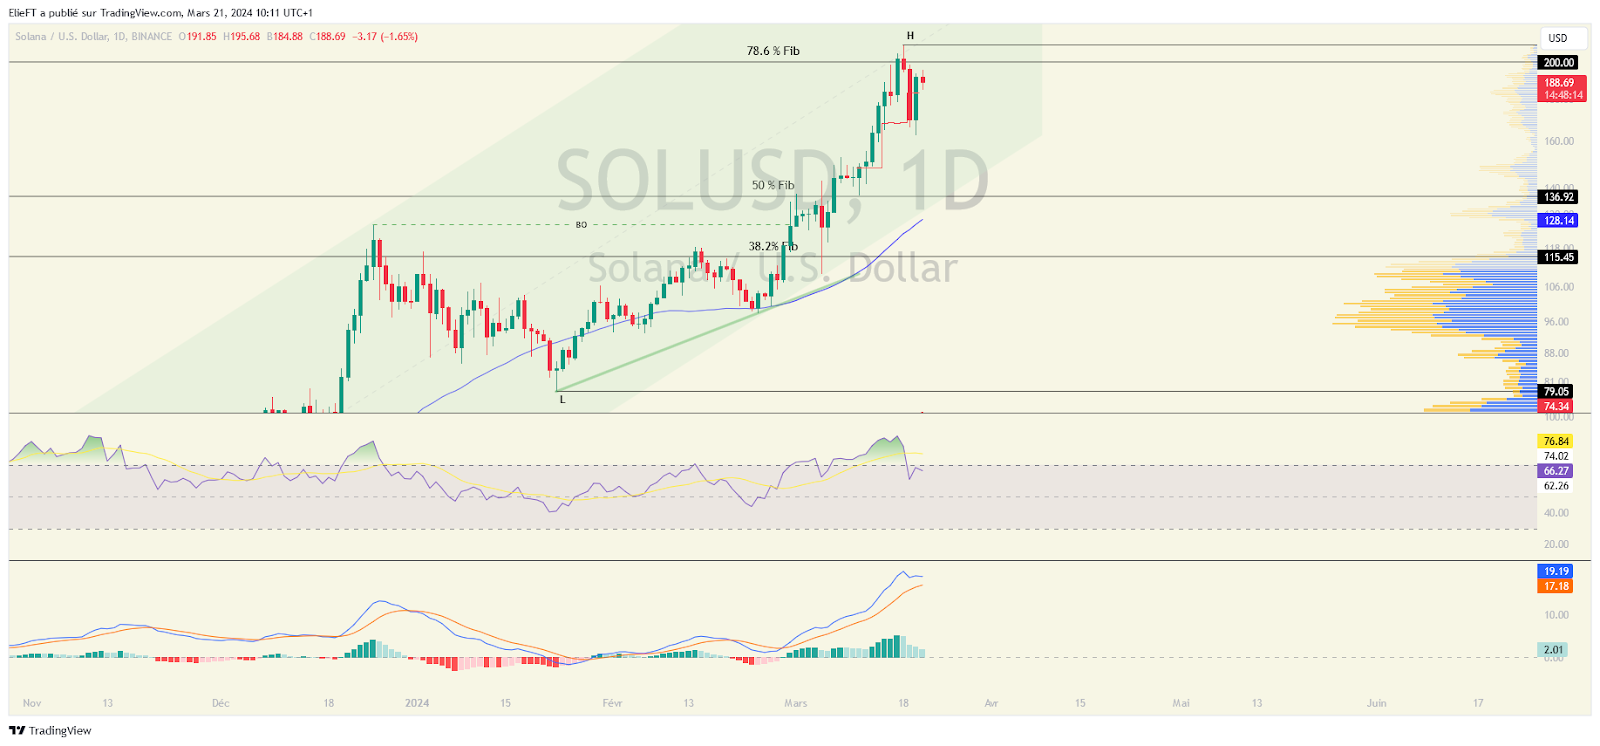 SOL/USD price chart on daily time frame